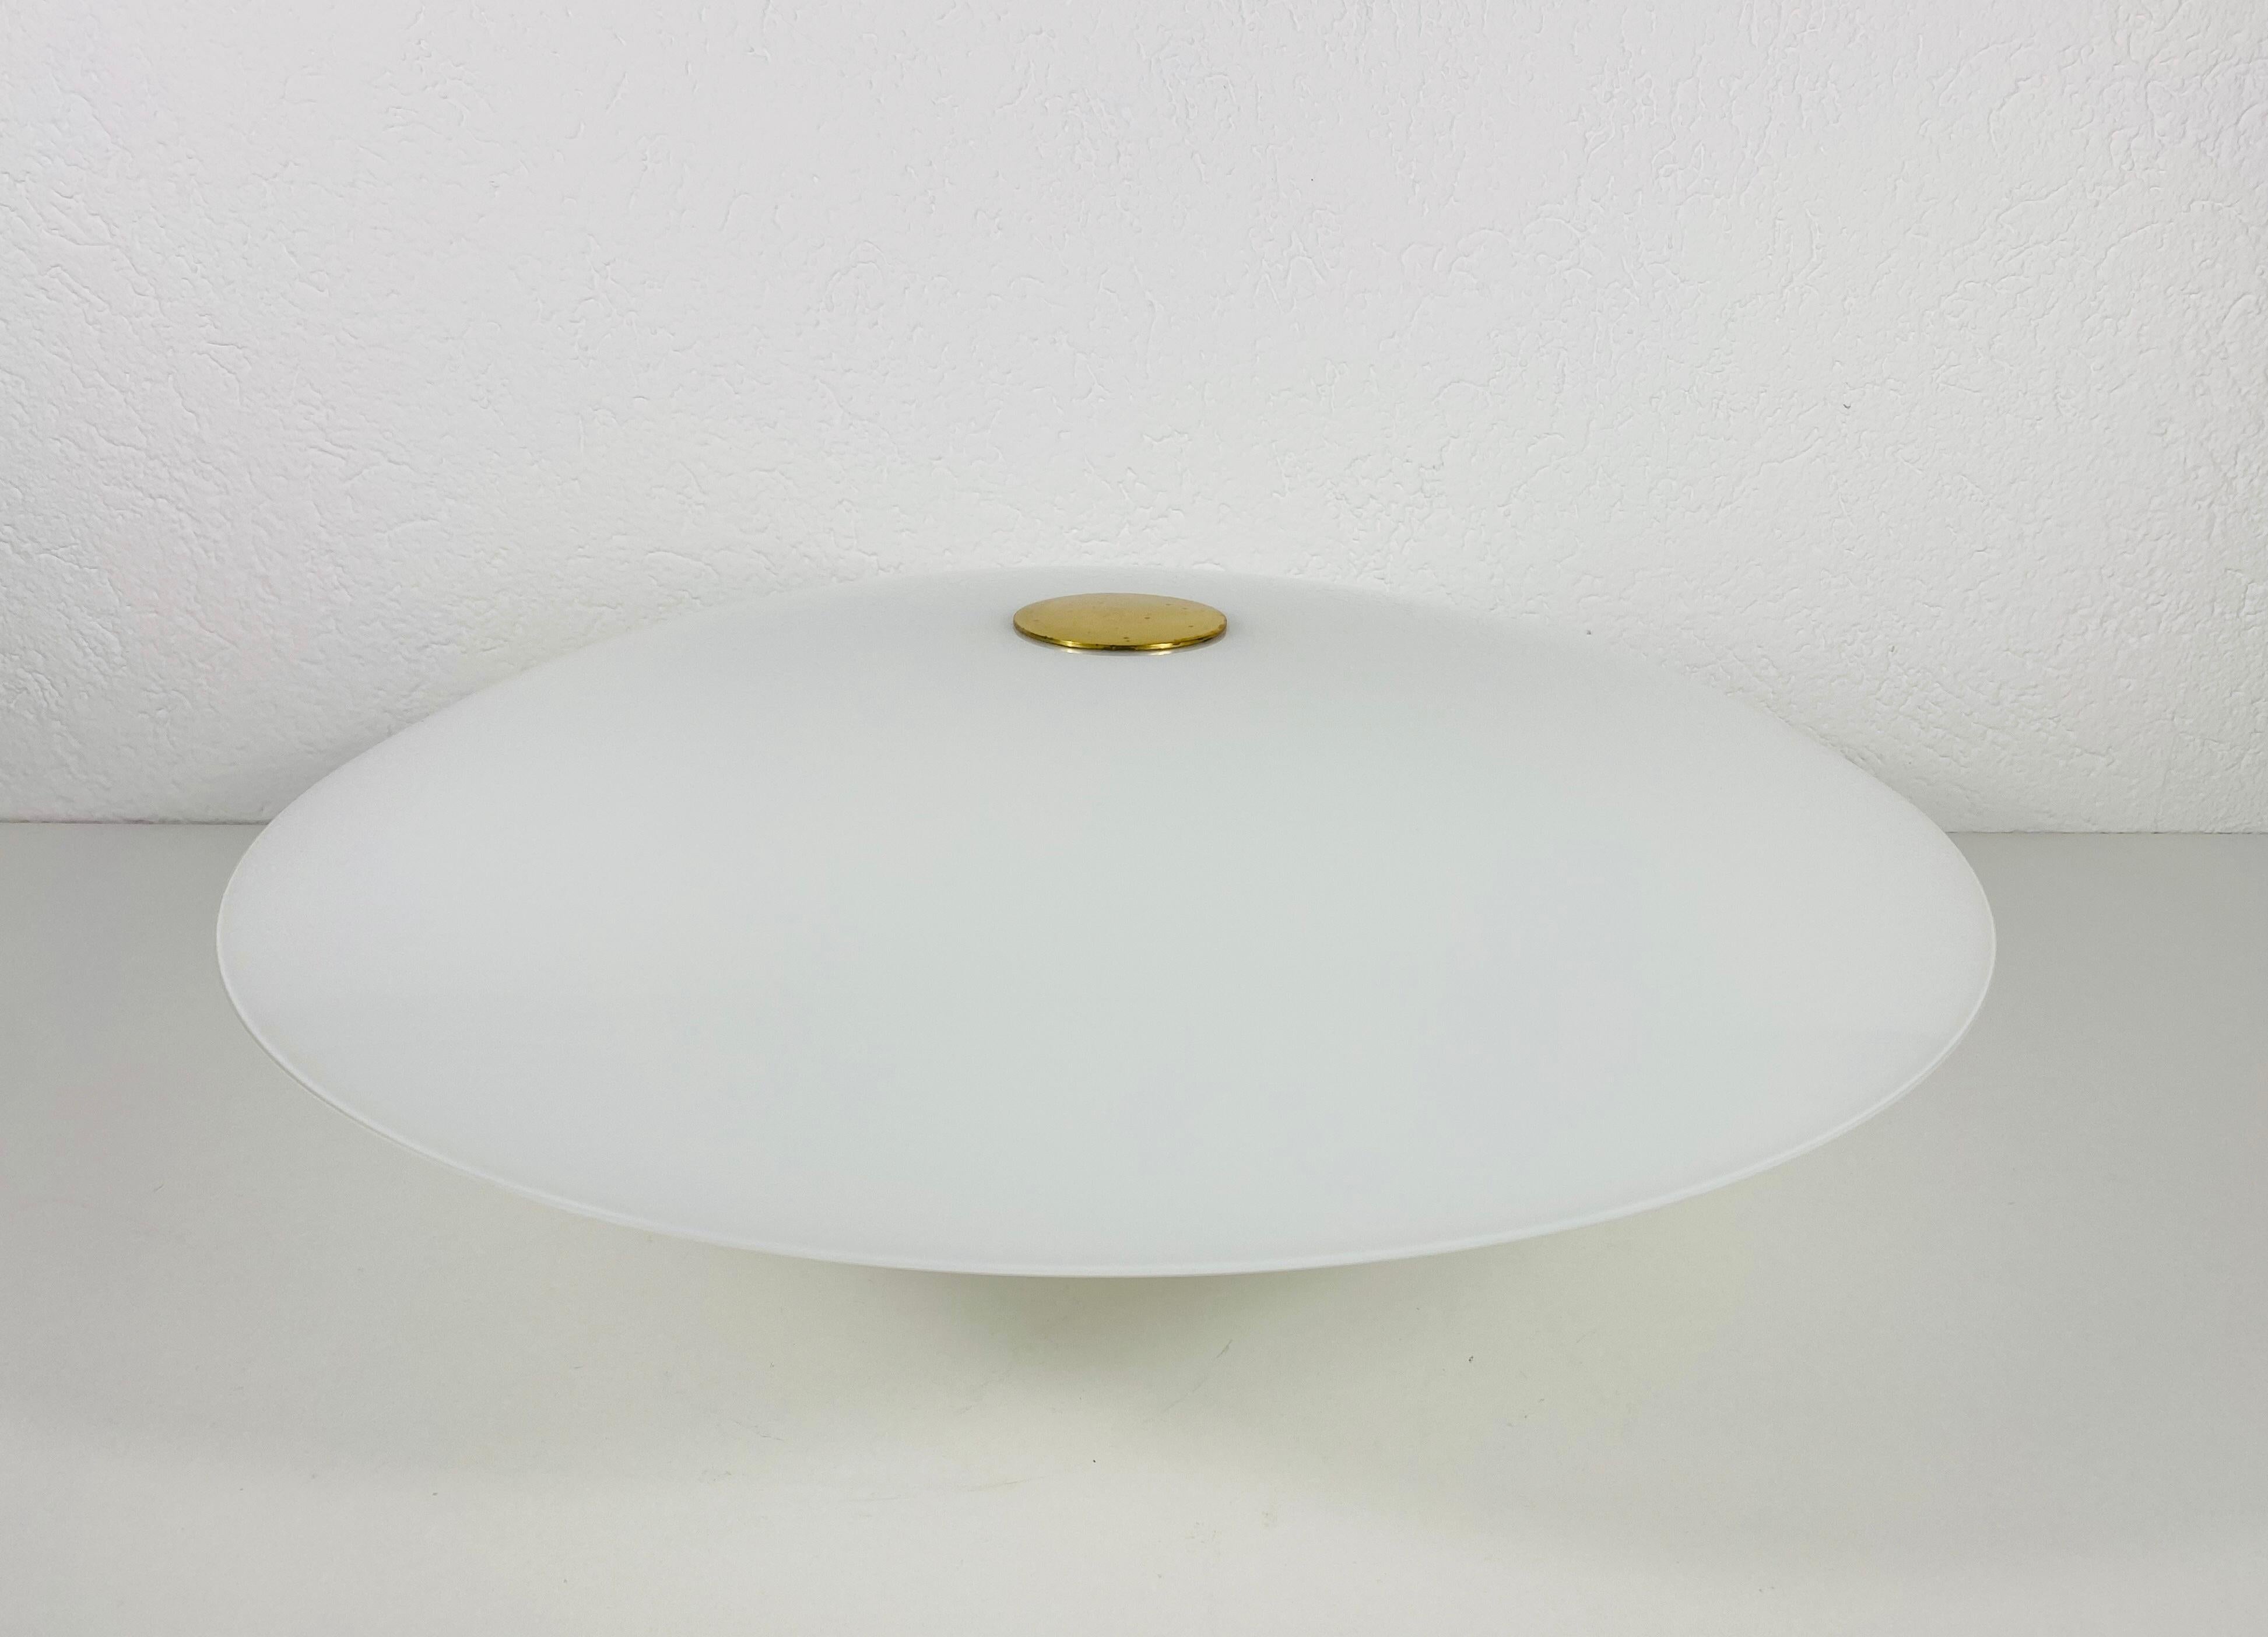 Late 20th Century Florian Schulz Midcentury Brass and Opal Glass Flush Mount or Wall Lamp, 1960s